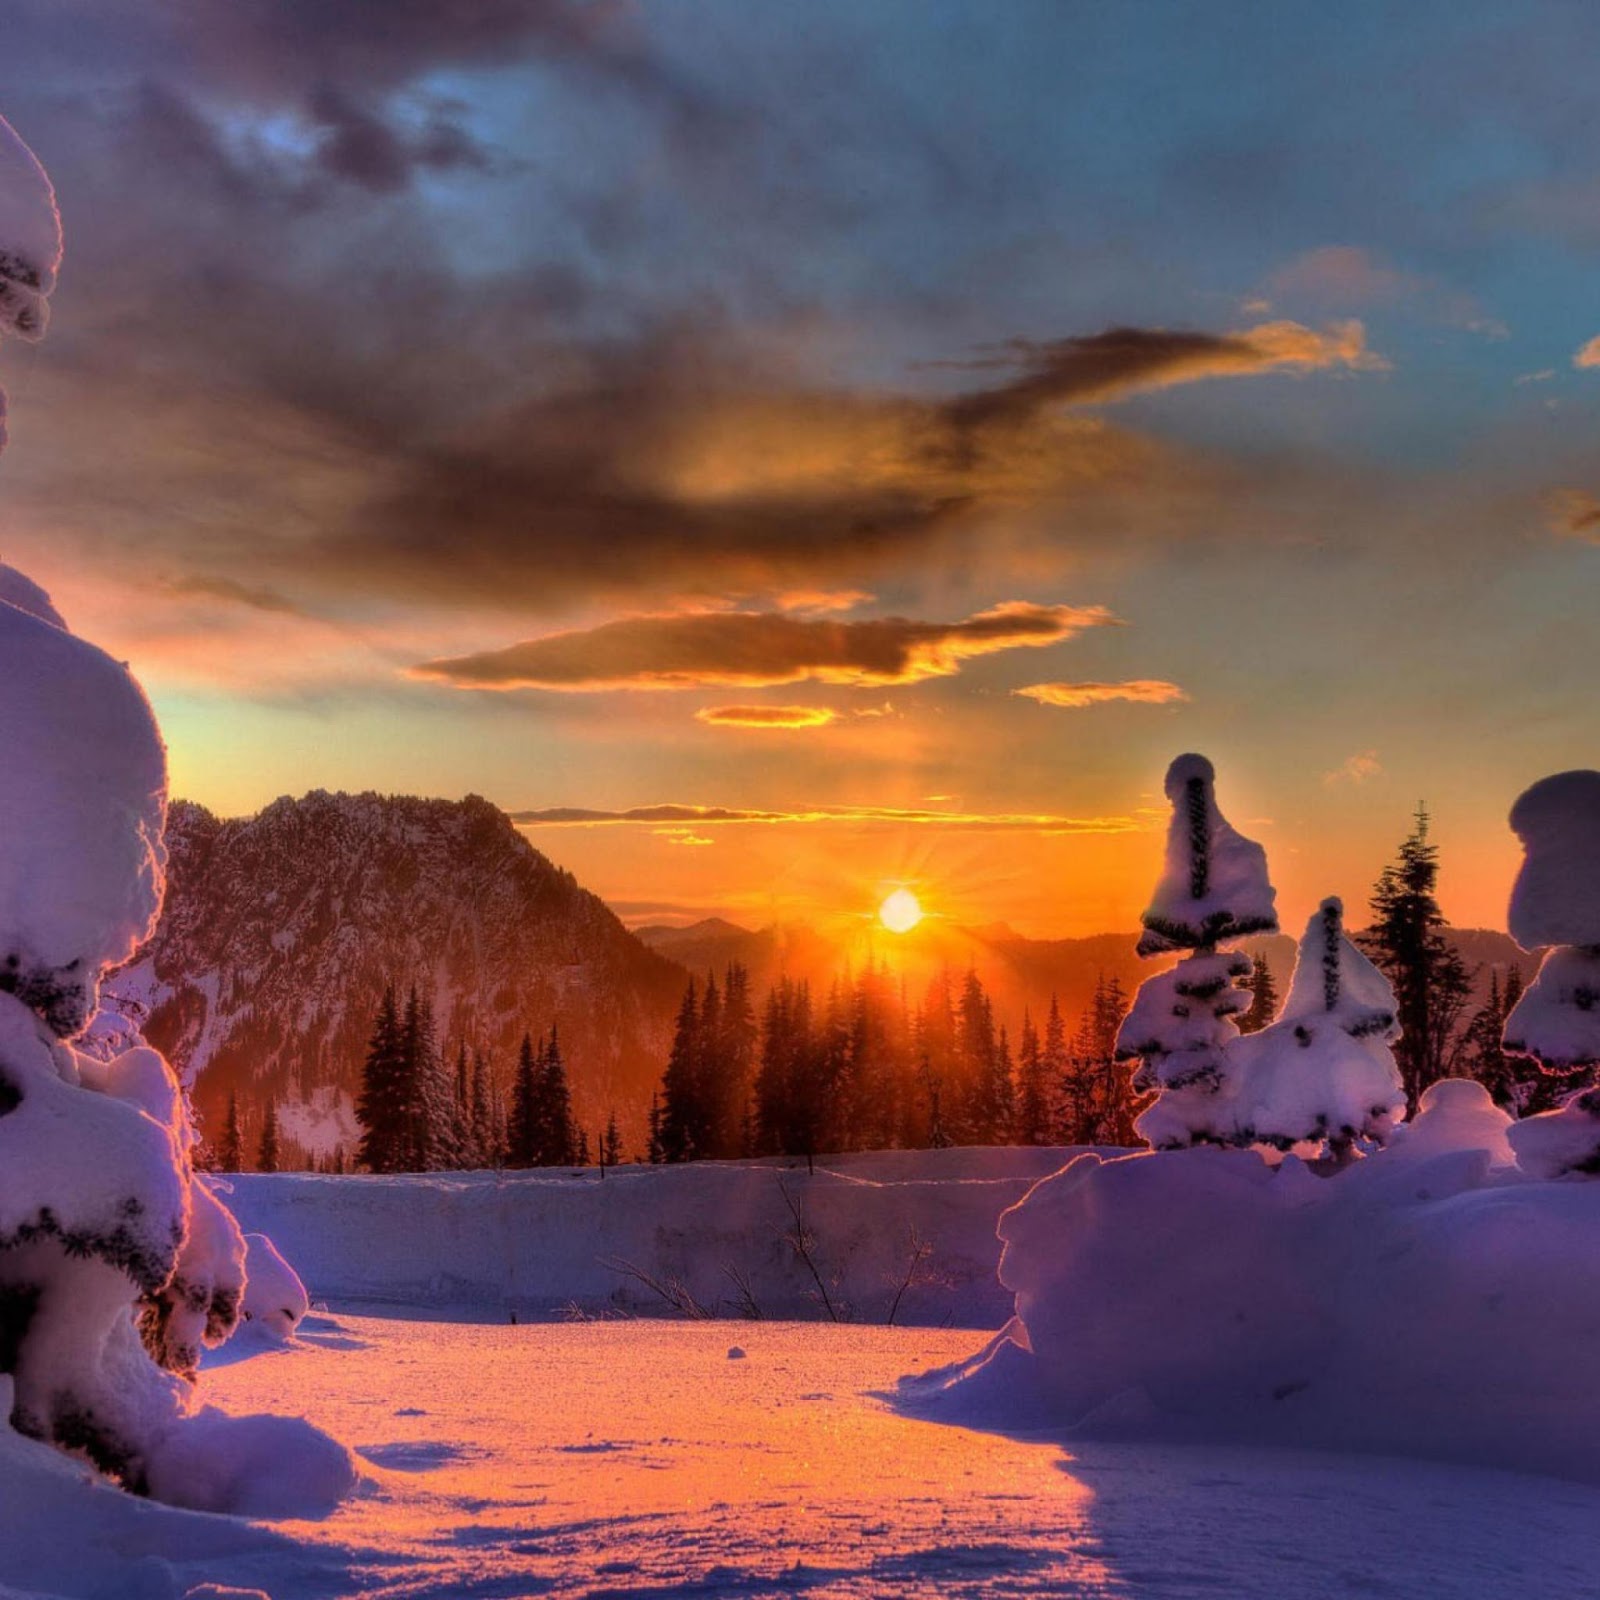 Winter Themed HD Wallpapers for iPad 4 - Gadgets, Apps and Flash Games